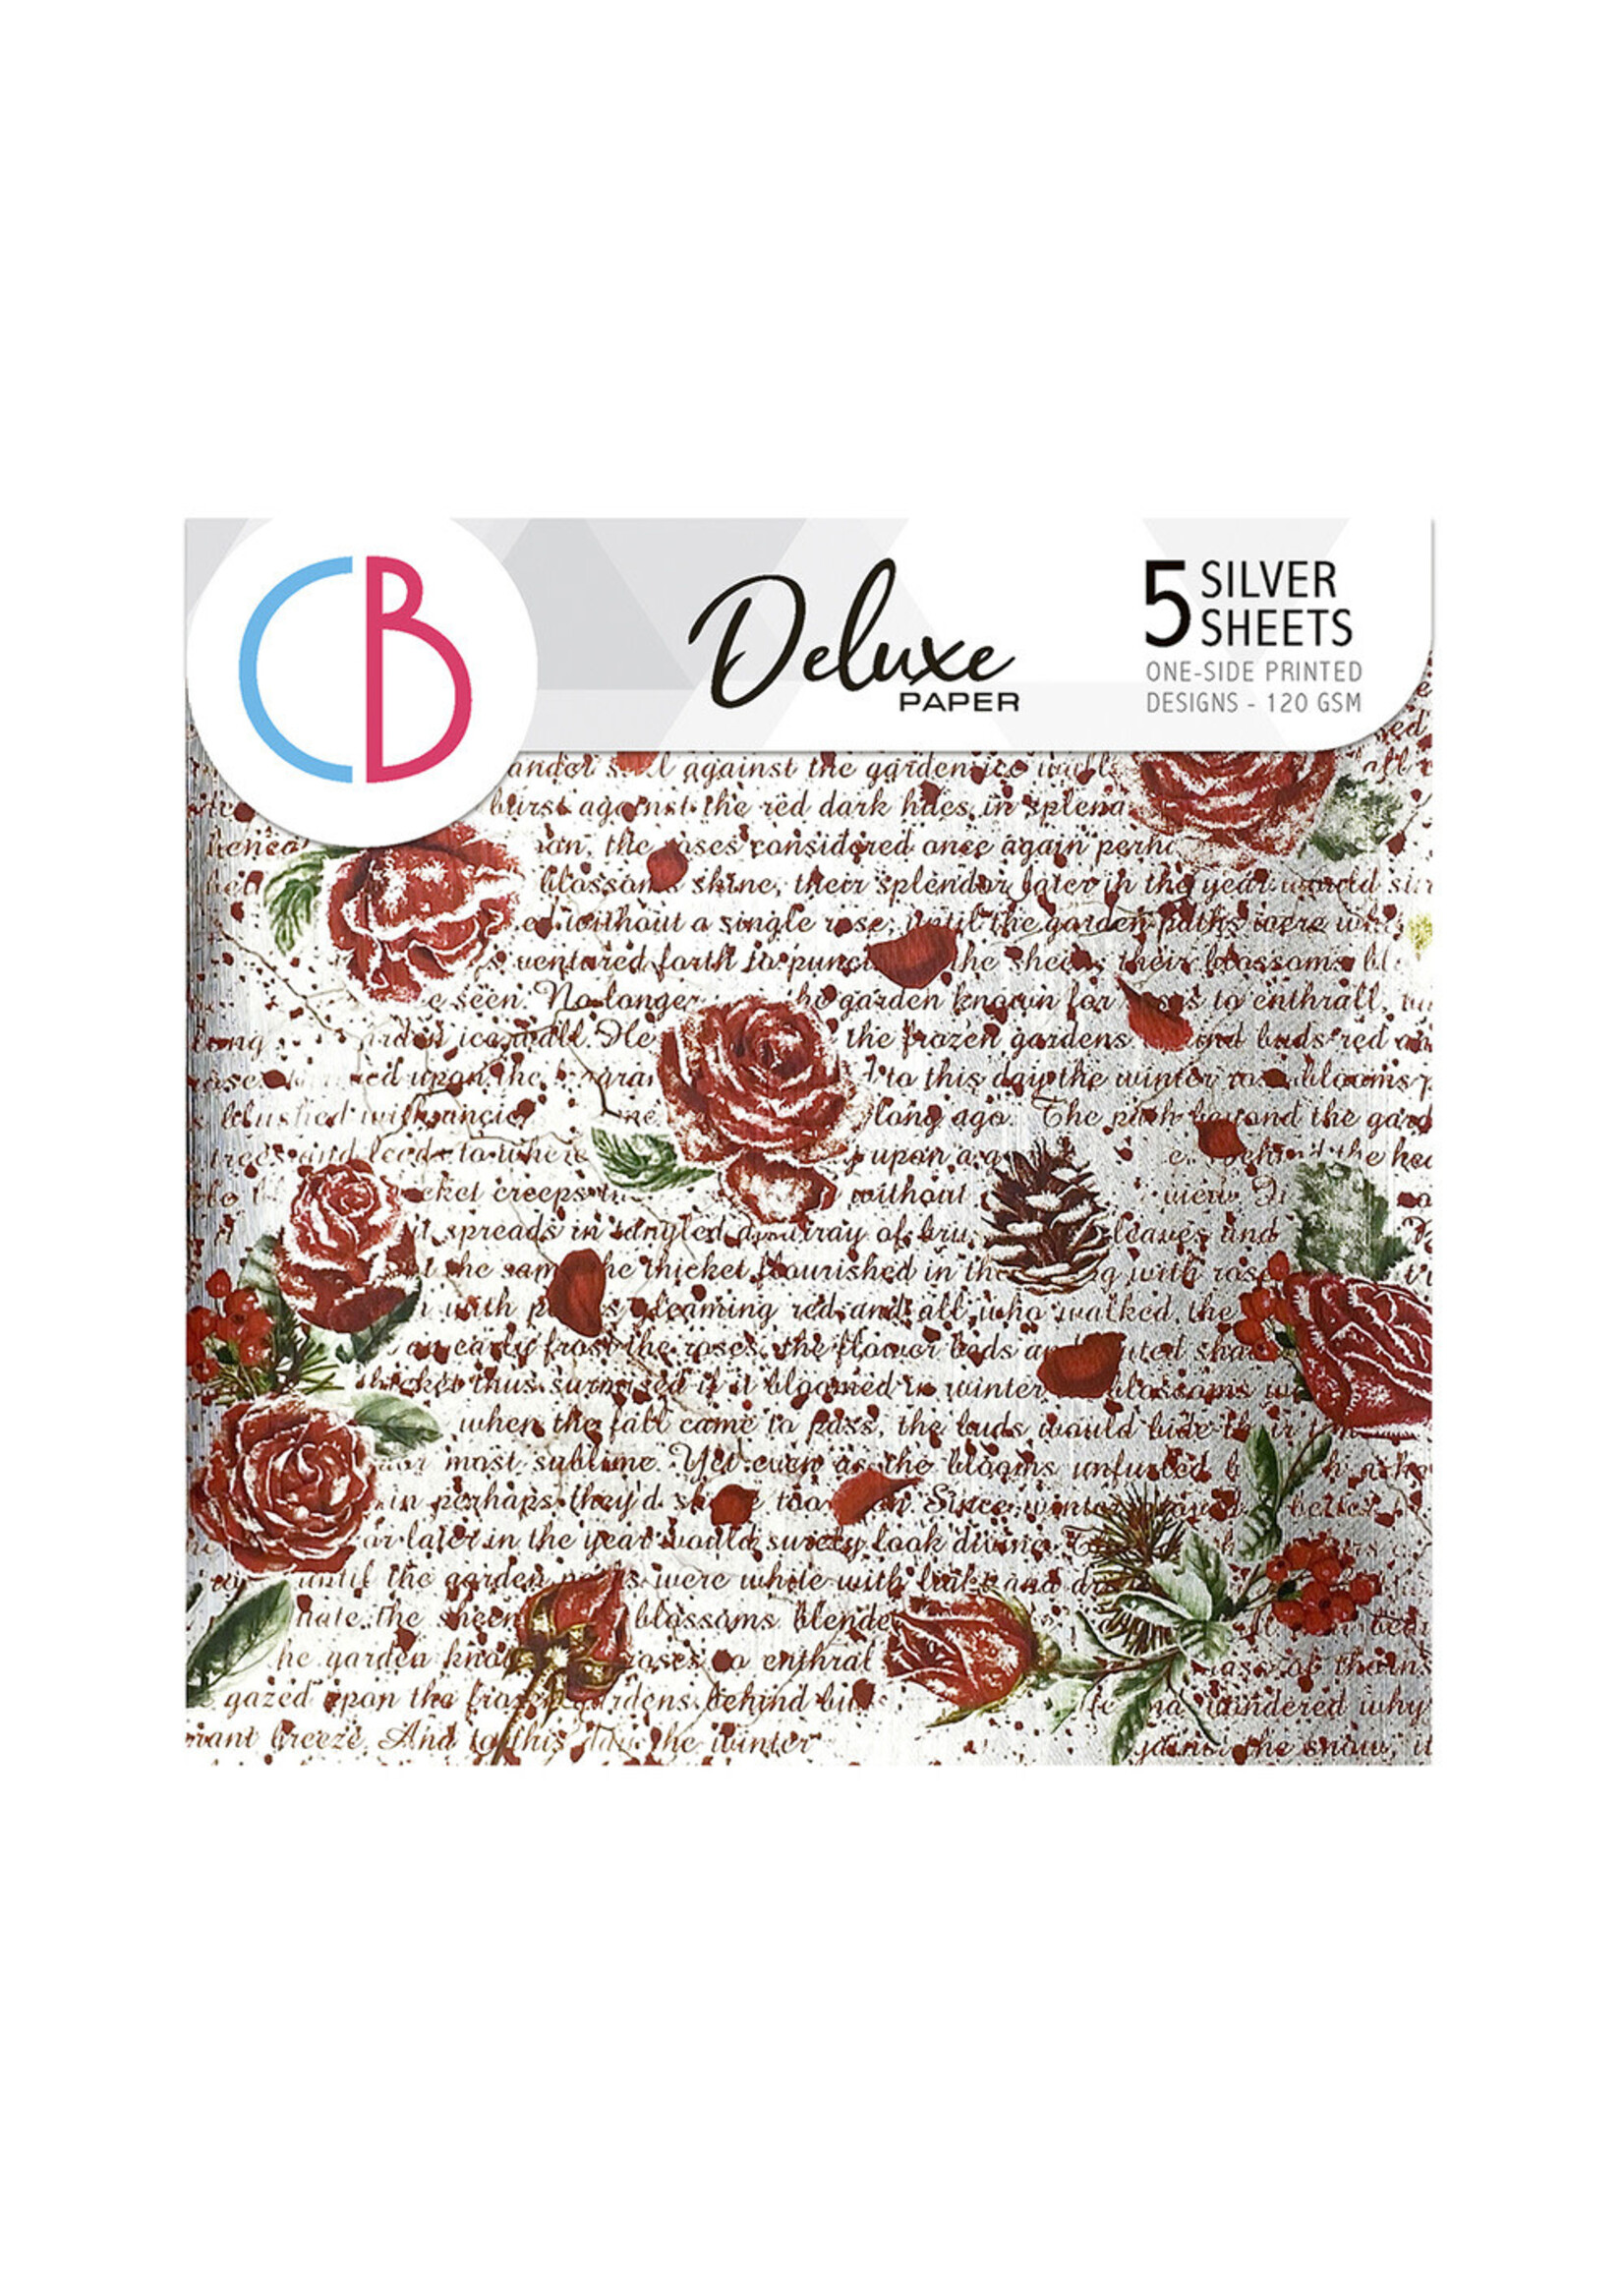 Ciao Bella 6x6 Silver Sheets, Frozen Roses